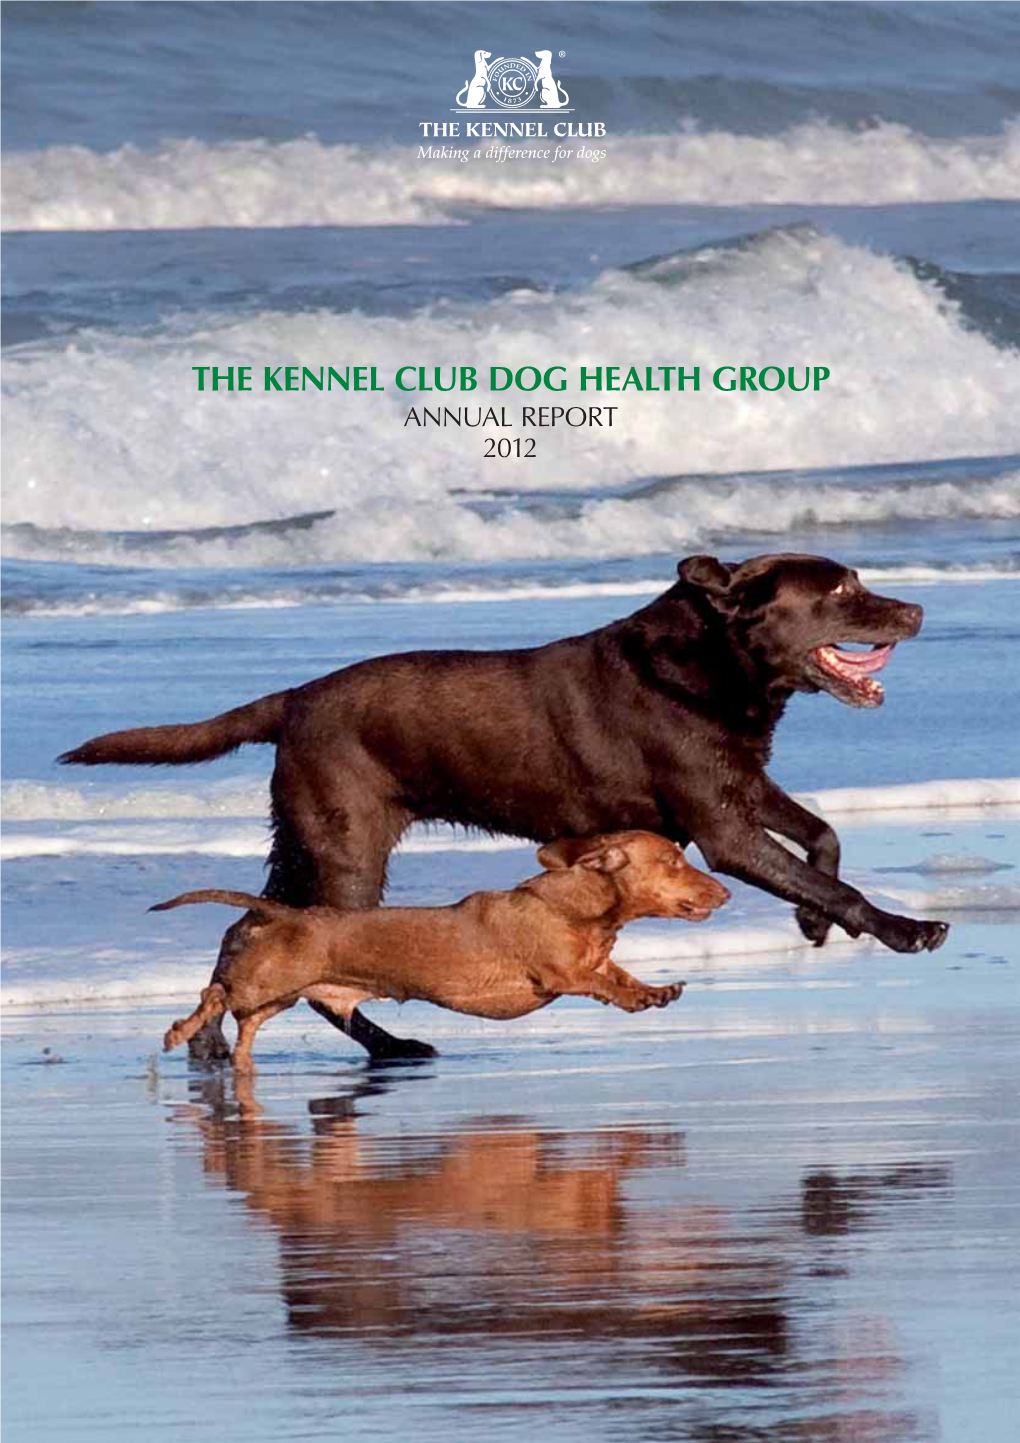 The Kennel Club Dog Health Group Annual Report 2012 Annual Report 2012 the Kennel Club Dog Heath Group